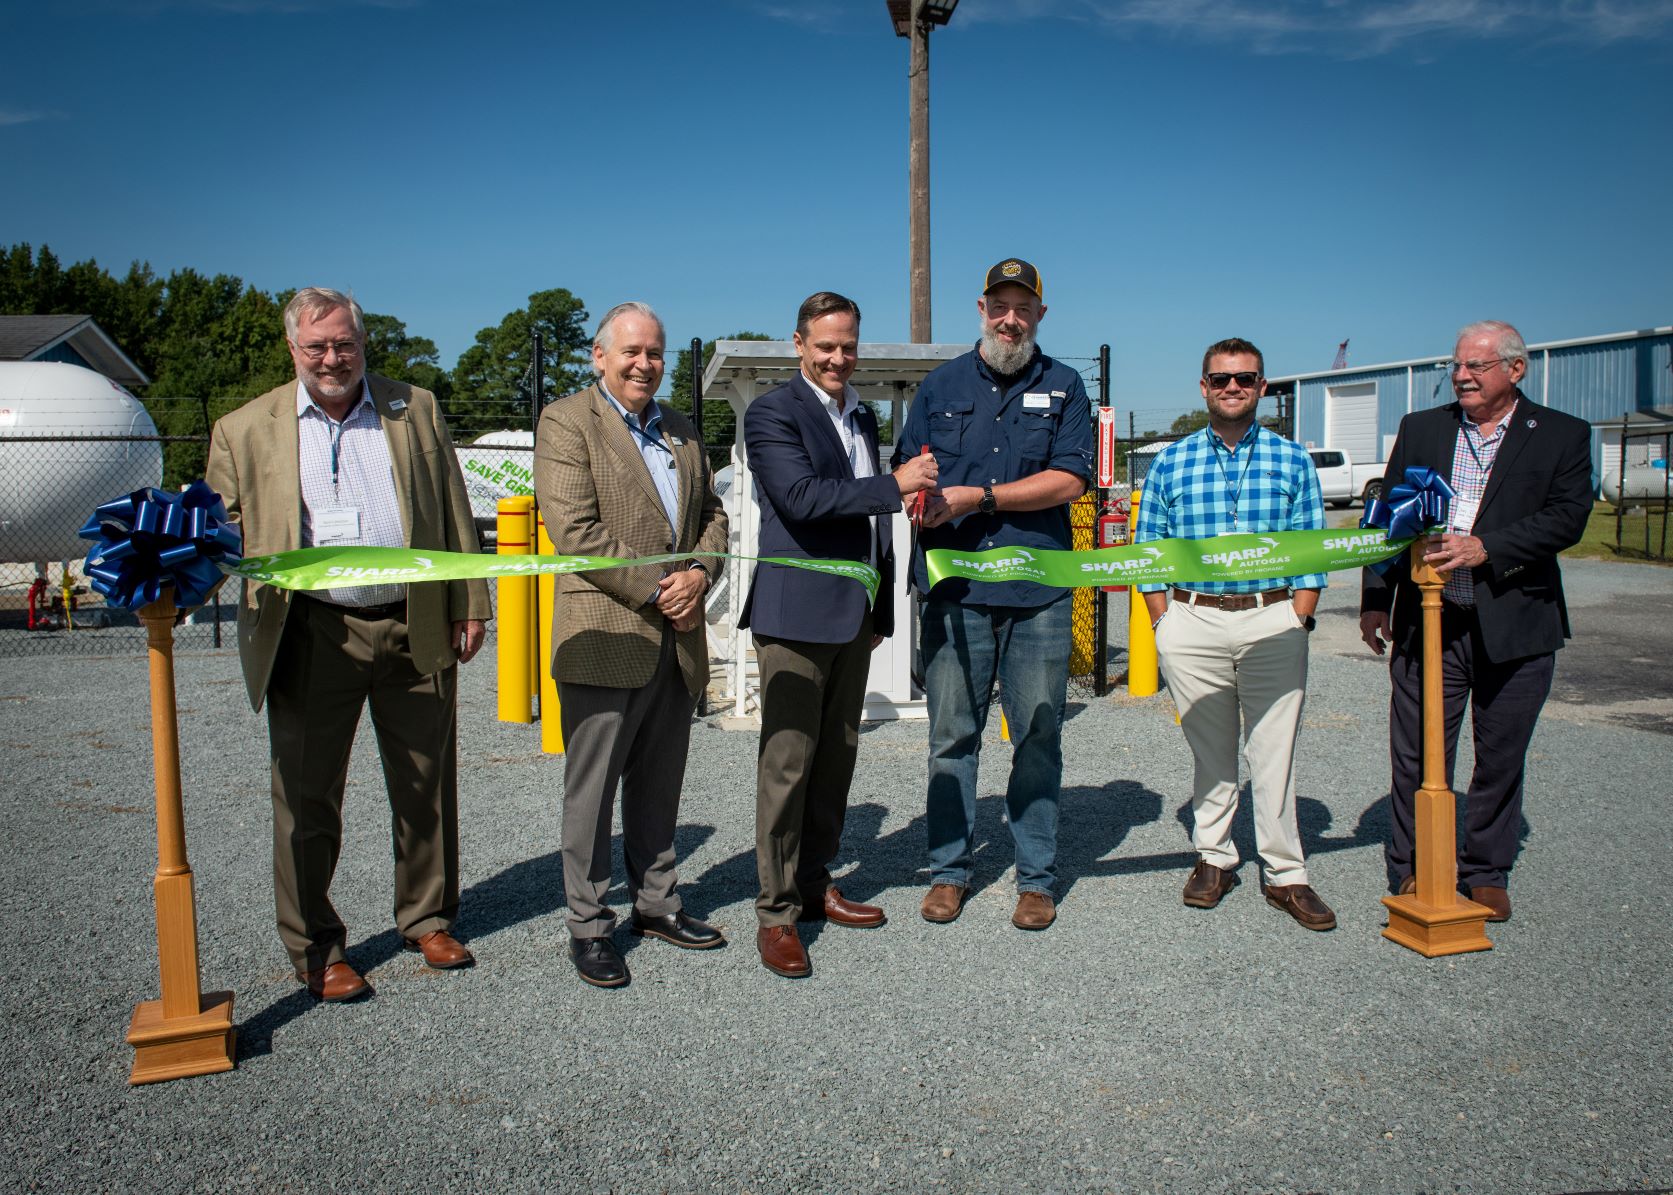 Five gentleman cutting the ribbon on the new fueling station